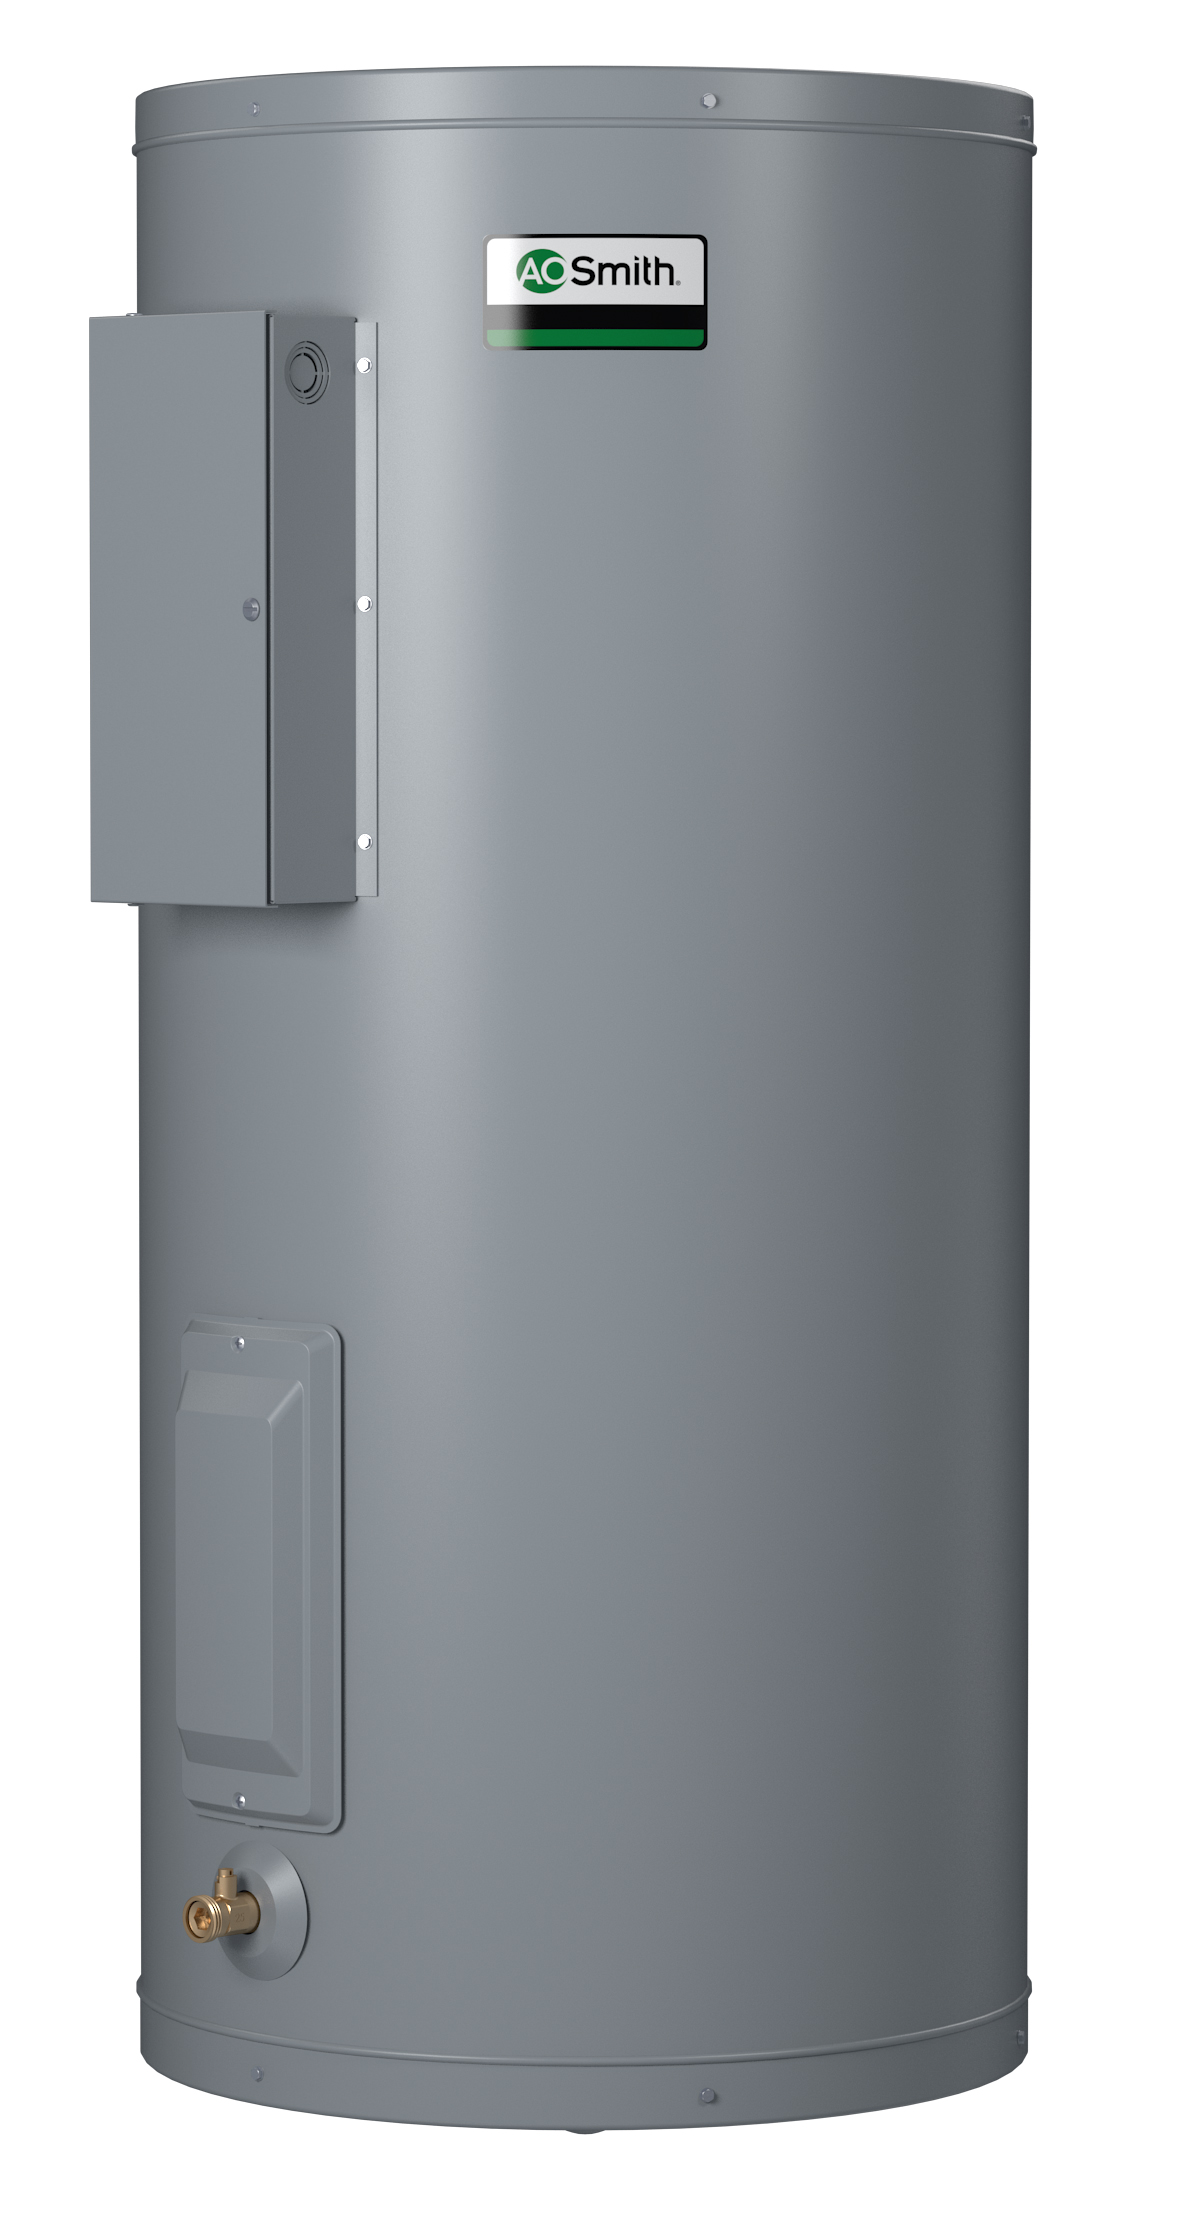 AO SMITH DEN-120D: 120 GALLONS, 11.0KW, 240 VOLT, 3 PHASE, (2-5500 WATT ELEMENTS, SIMULTANEOUS WIRING), DURA-POWER, LIGHT DUTY COMMERCIAL ELECTRIC WATER HEATER